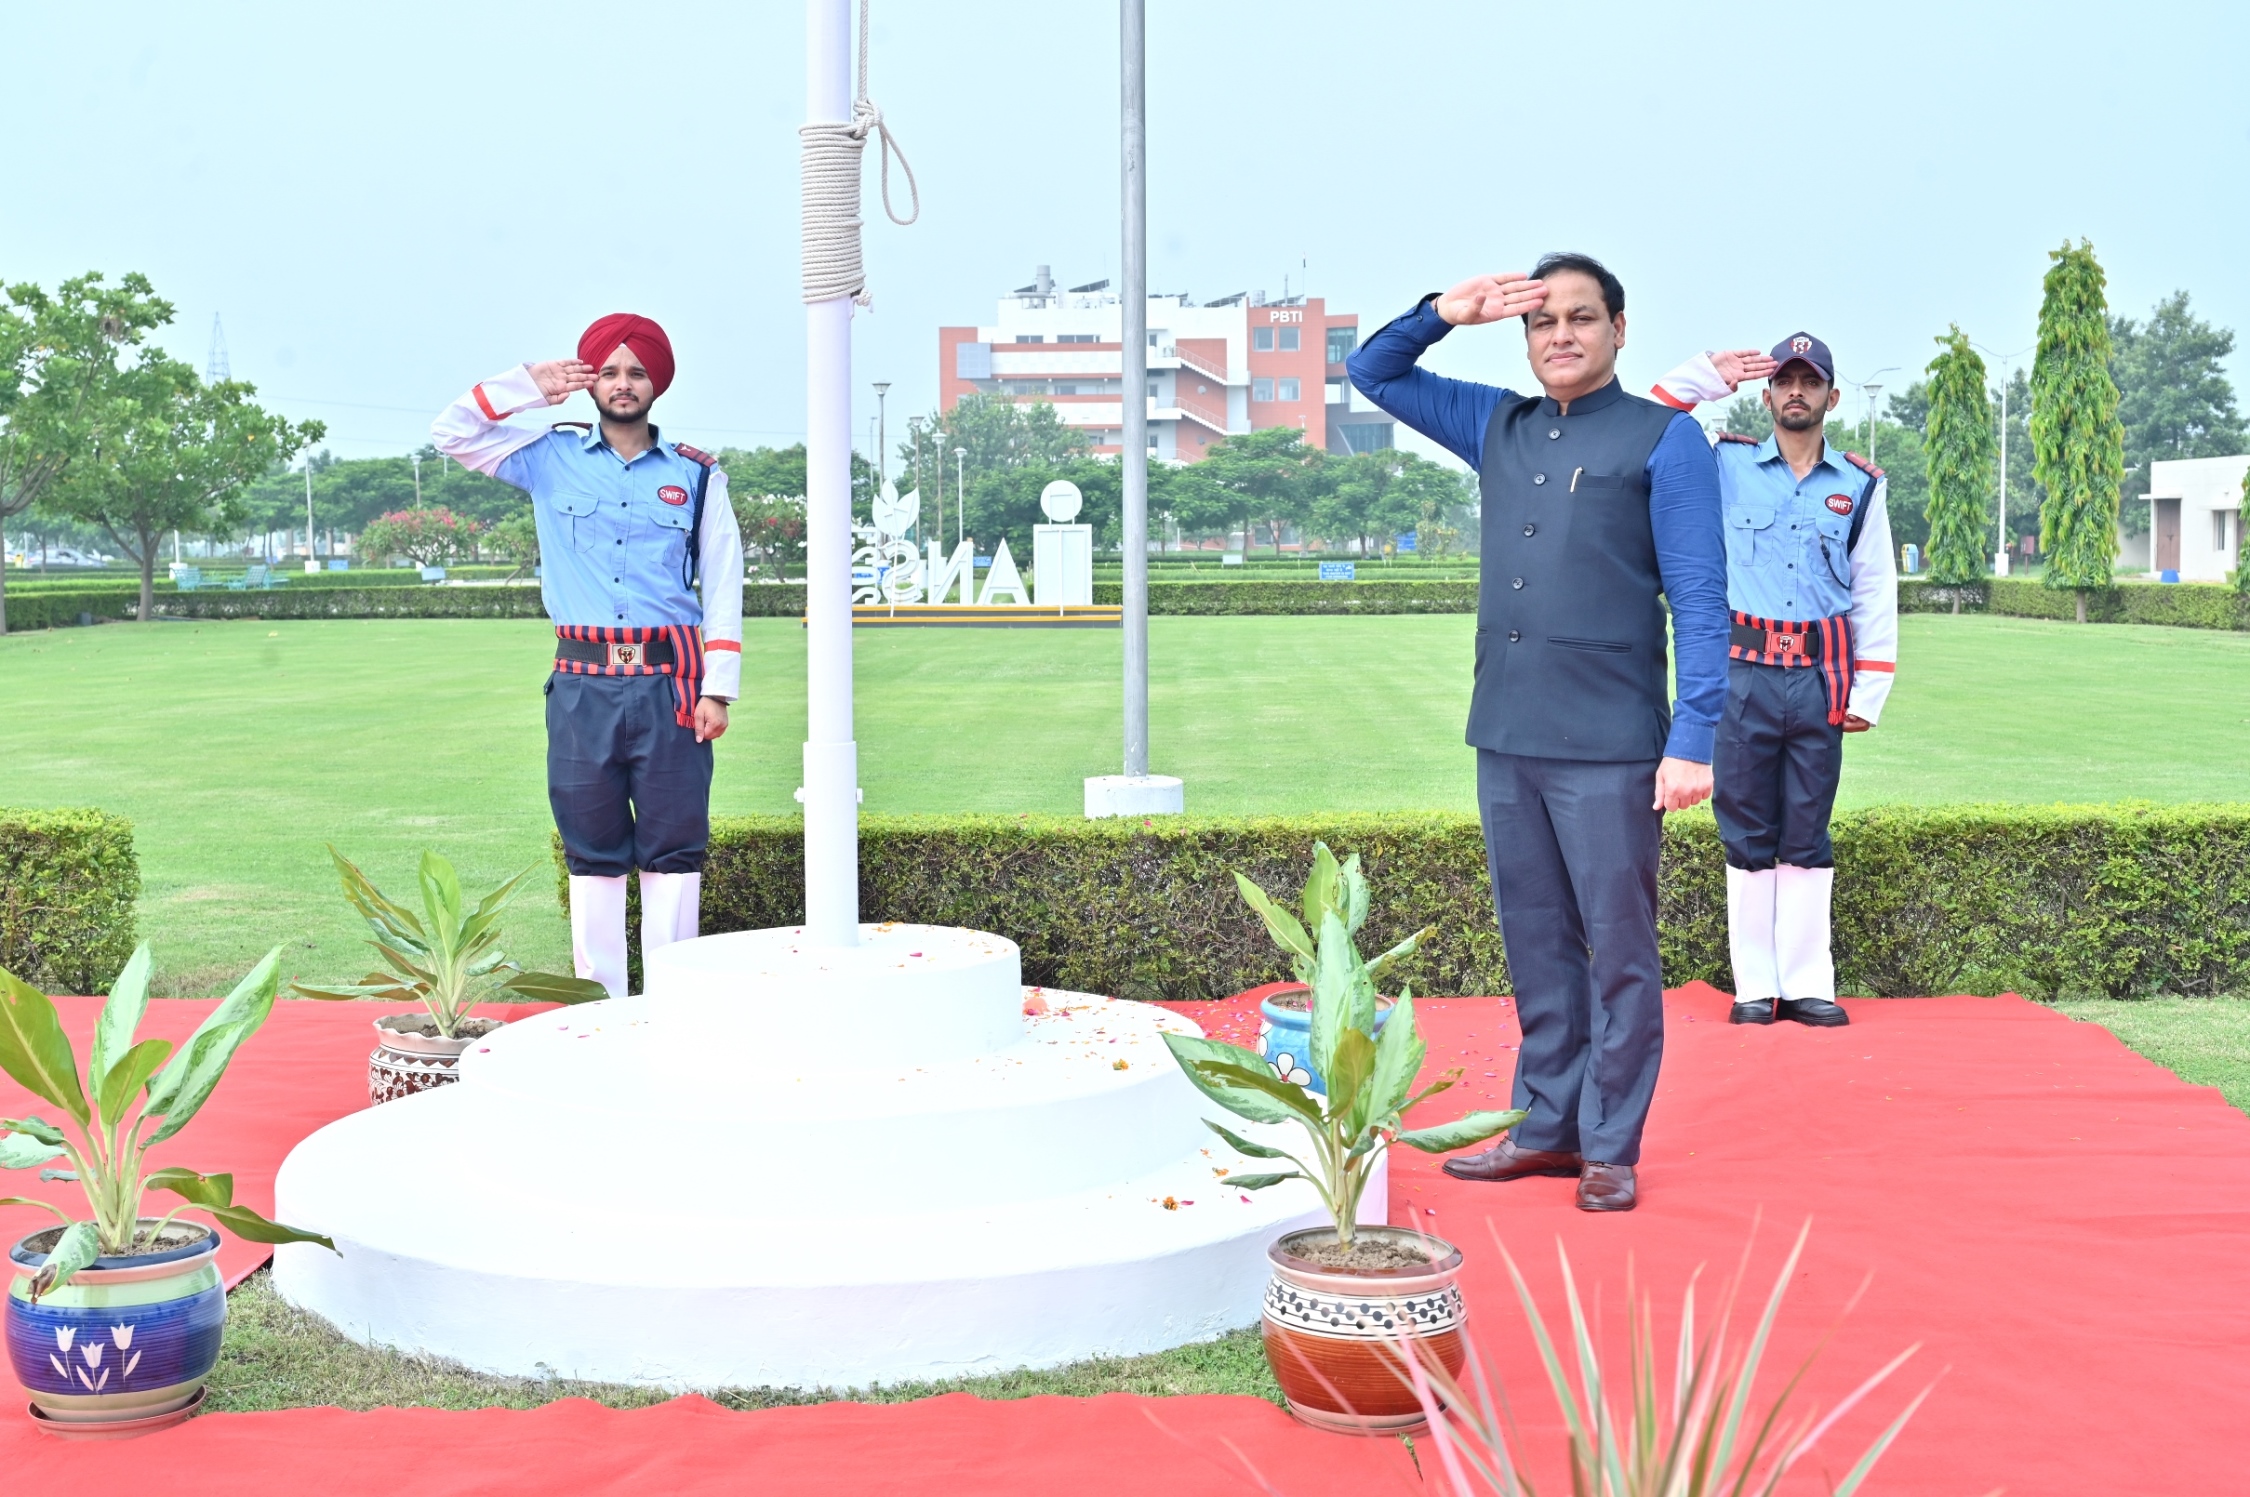 77th Independence Day celebration at NABI-CIAB Campus